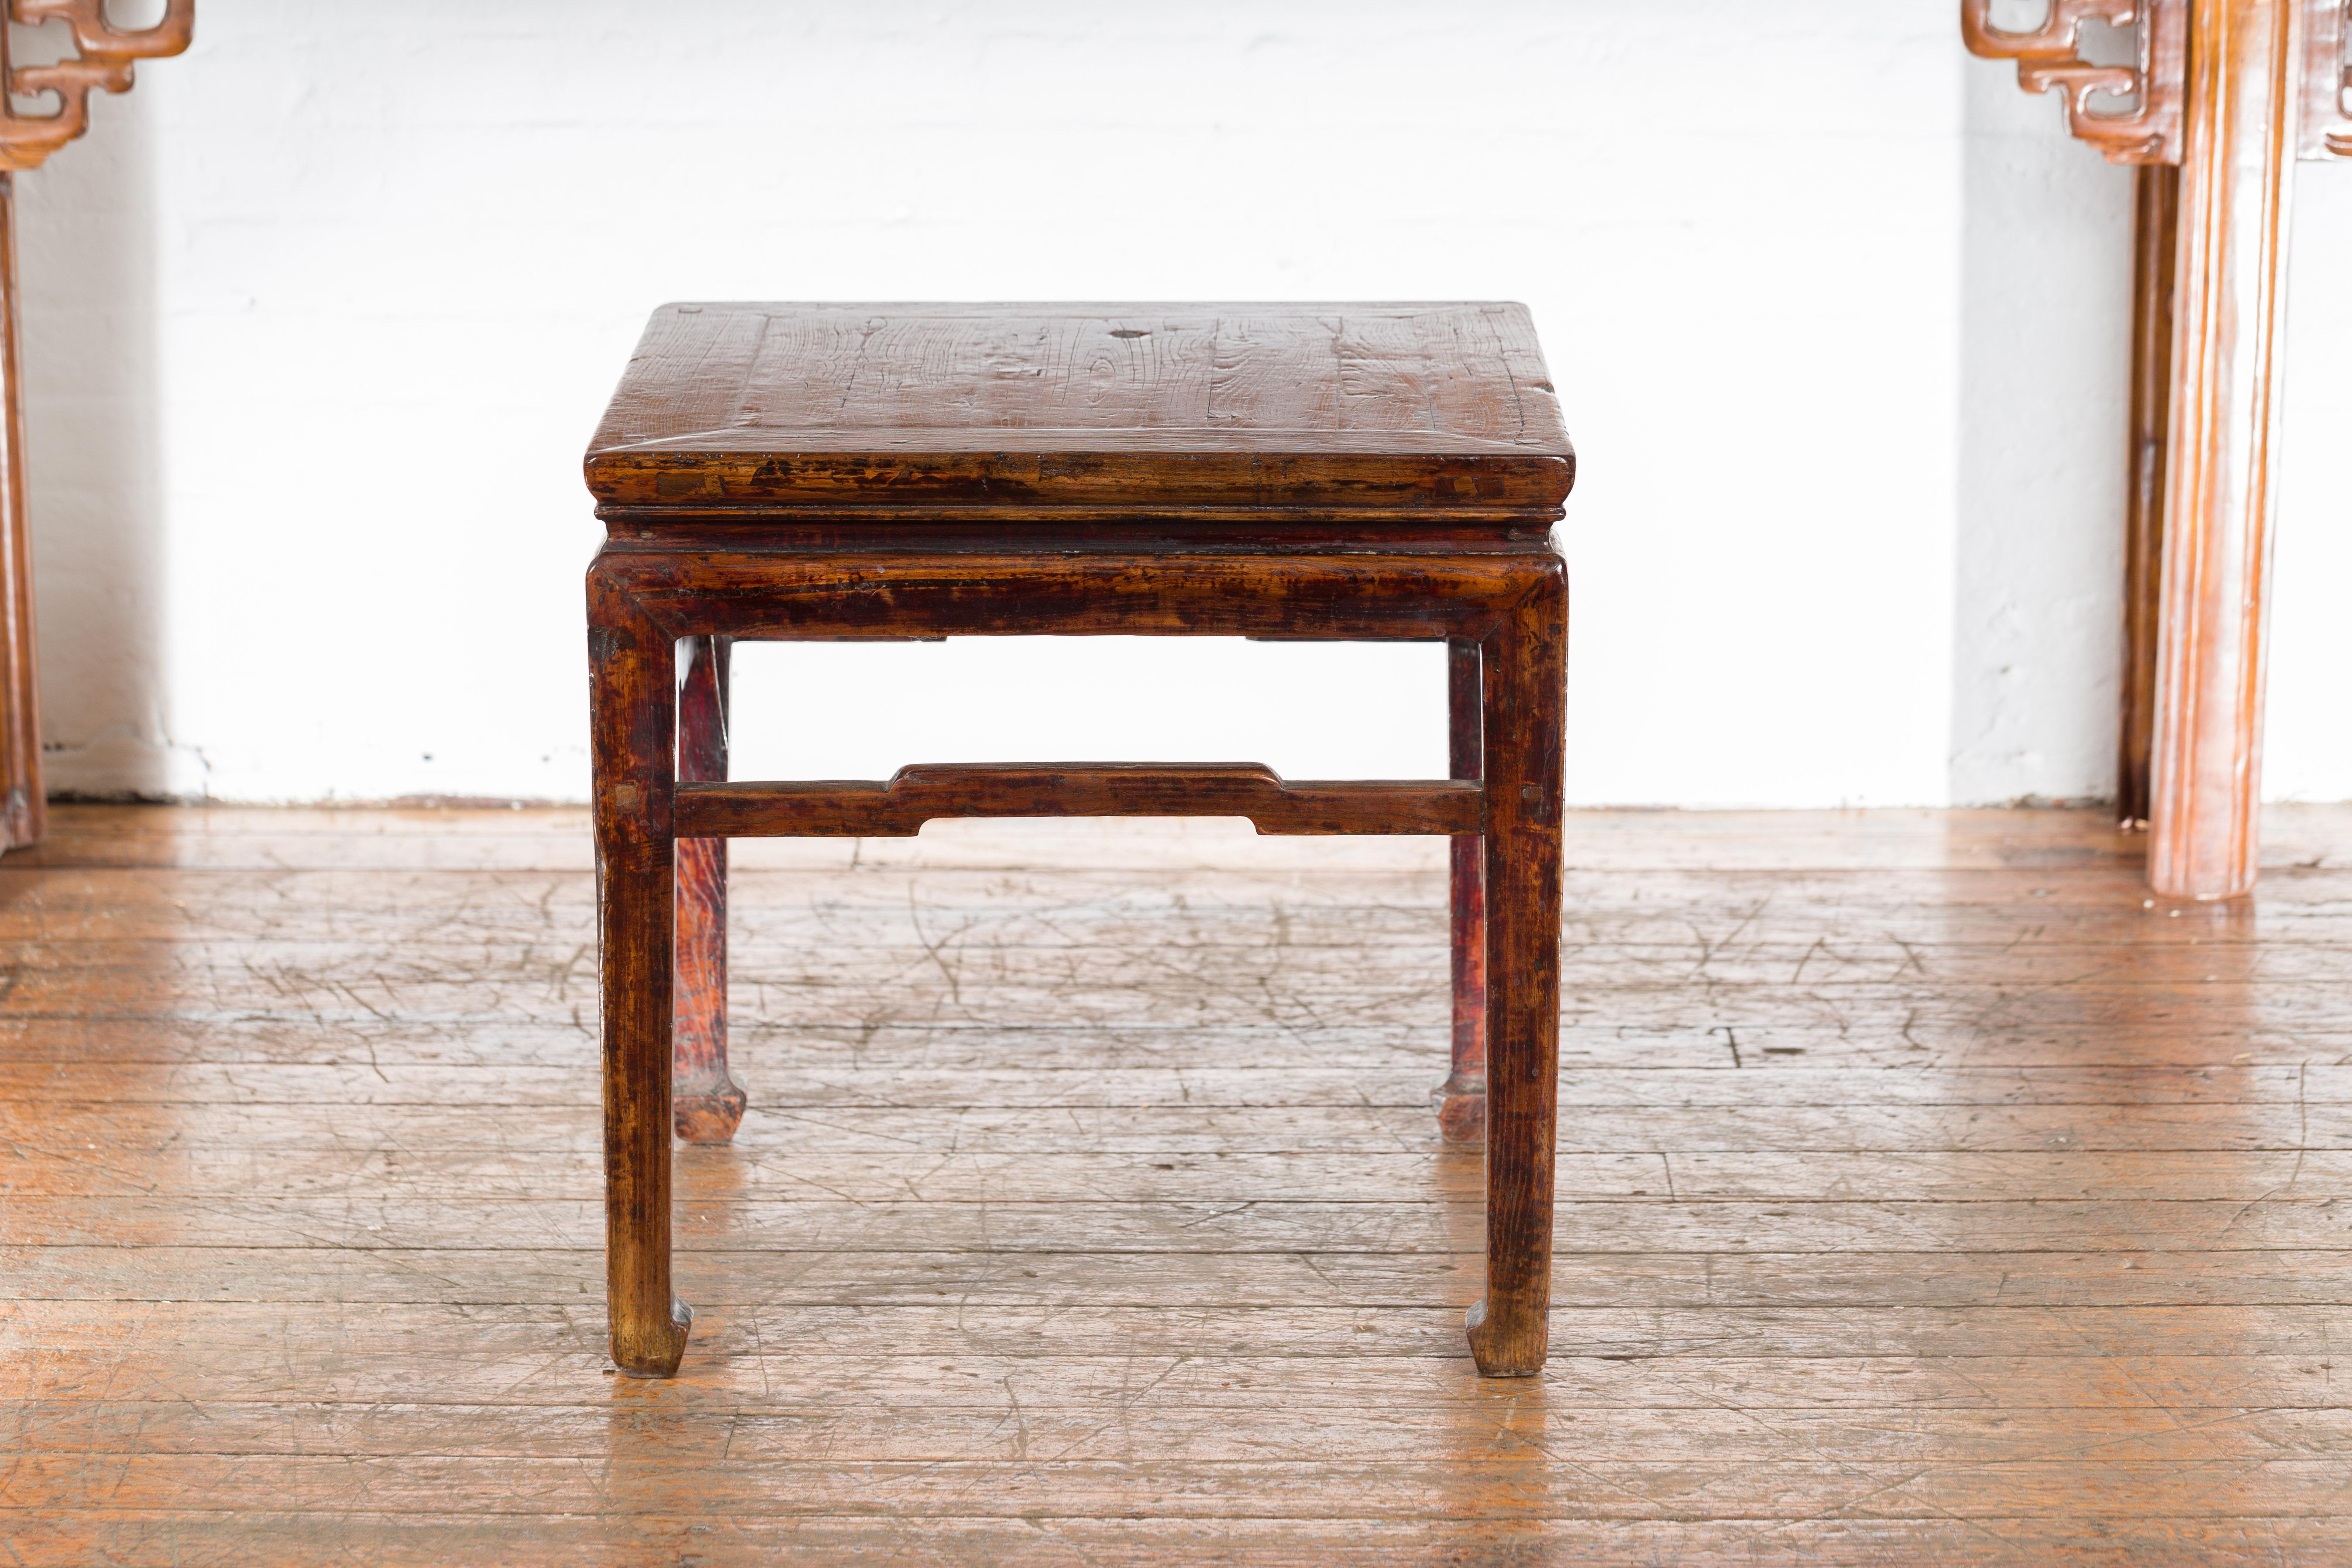 A Chinese vintage side lamp table from the mid 20th century, with horse hoof feet and humpback stretchers. Created in China during the midcentury period, this lamp table features a square top with central board, sitting above a waisted apron. The